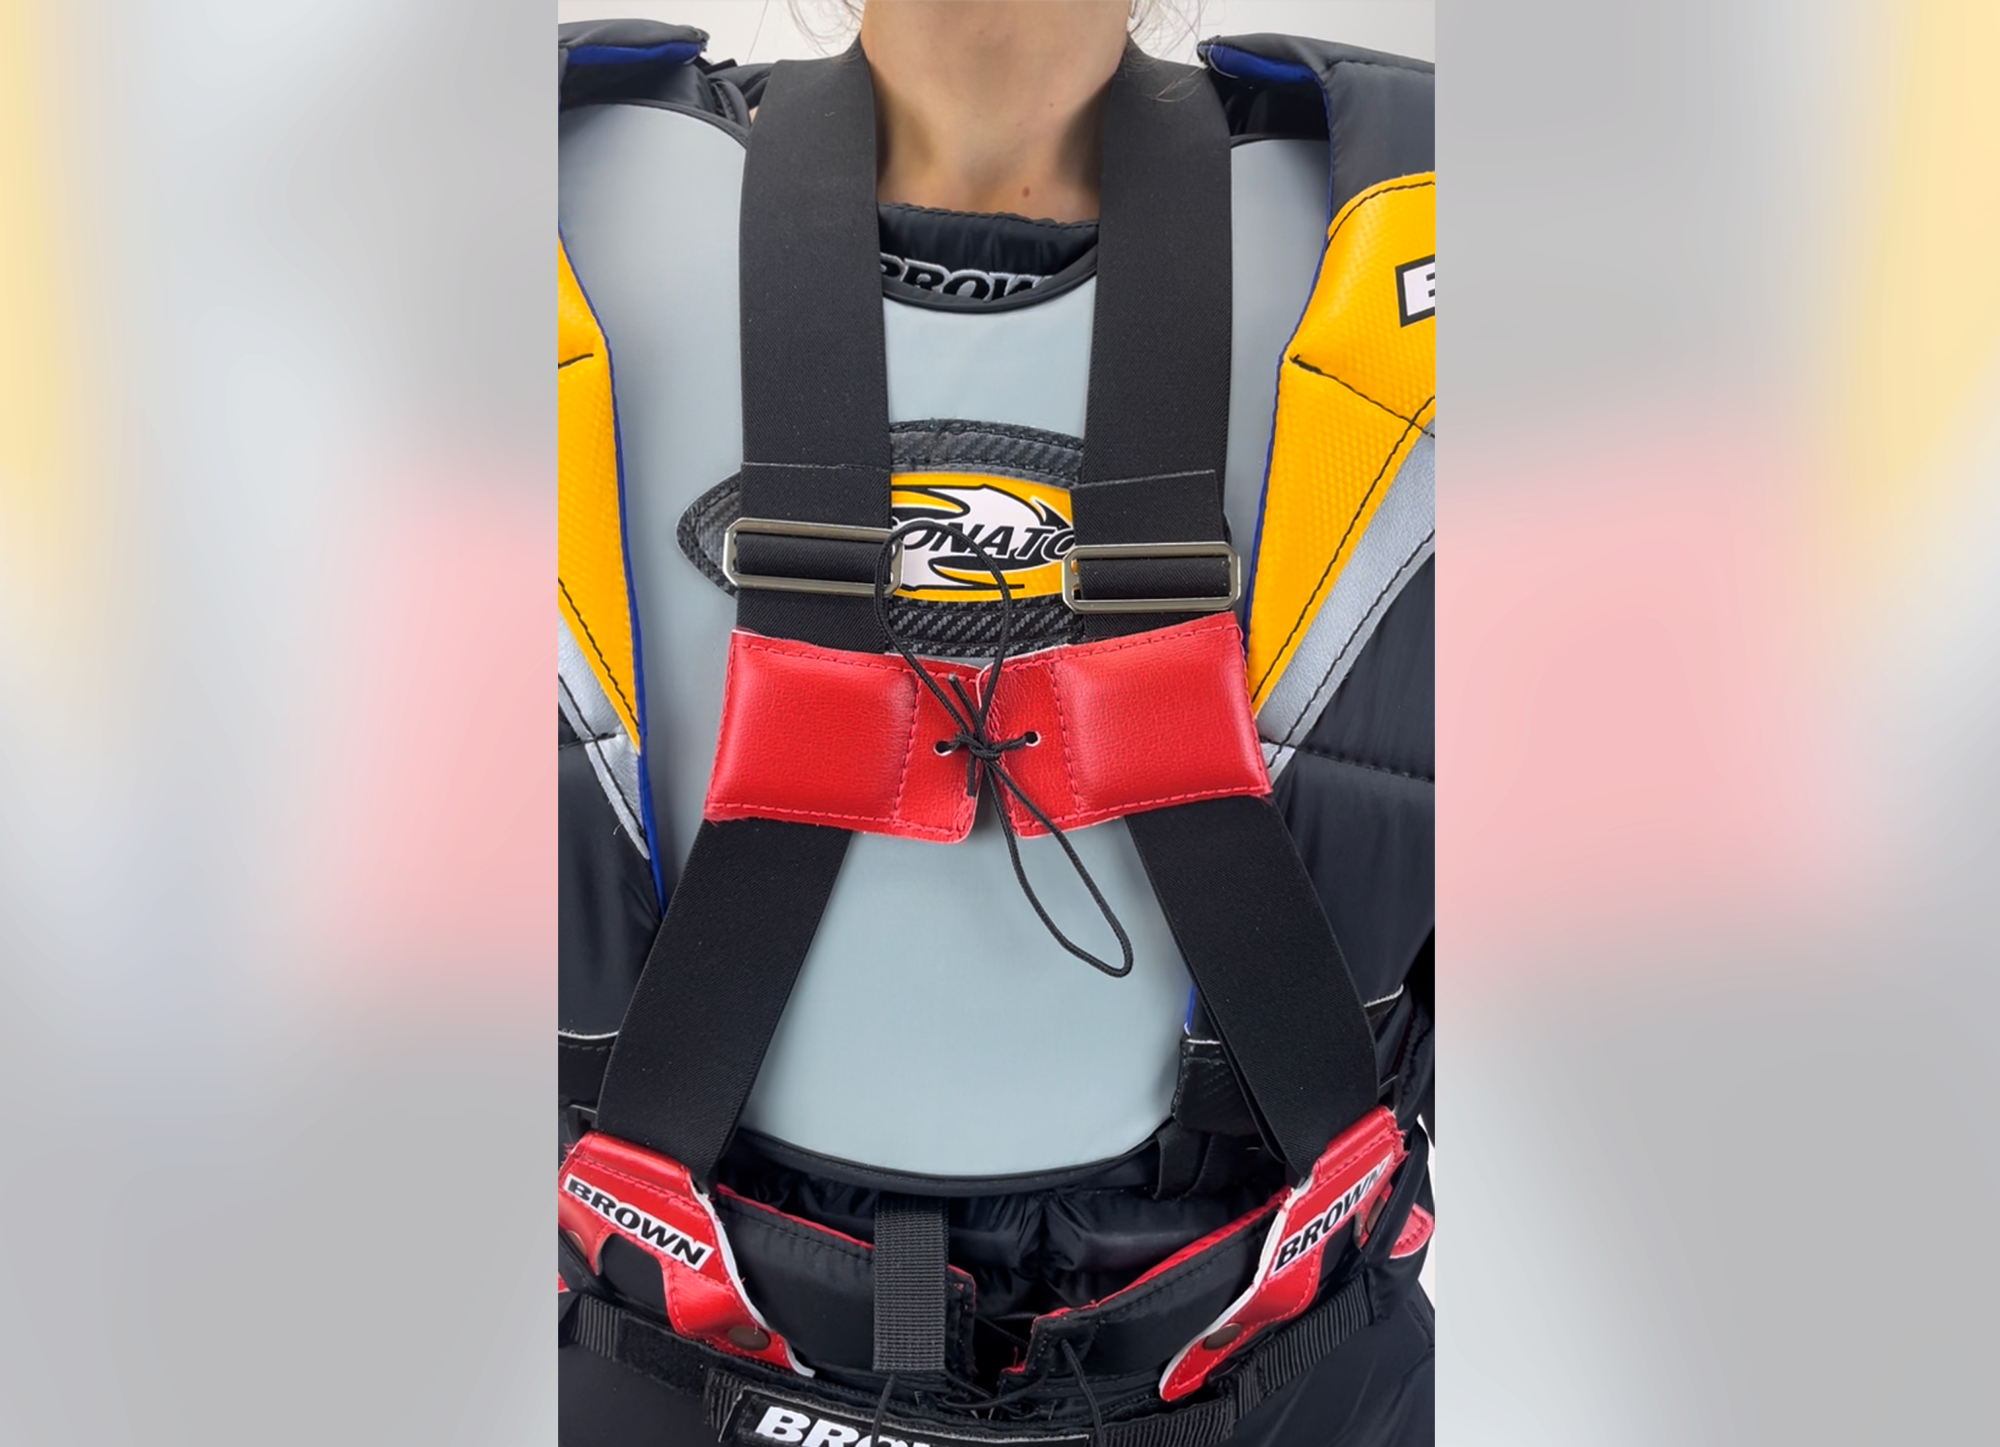 Suspenders over chest protector